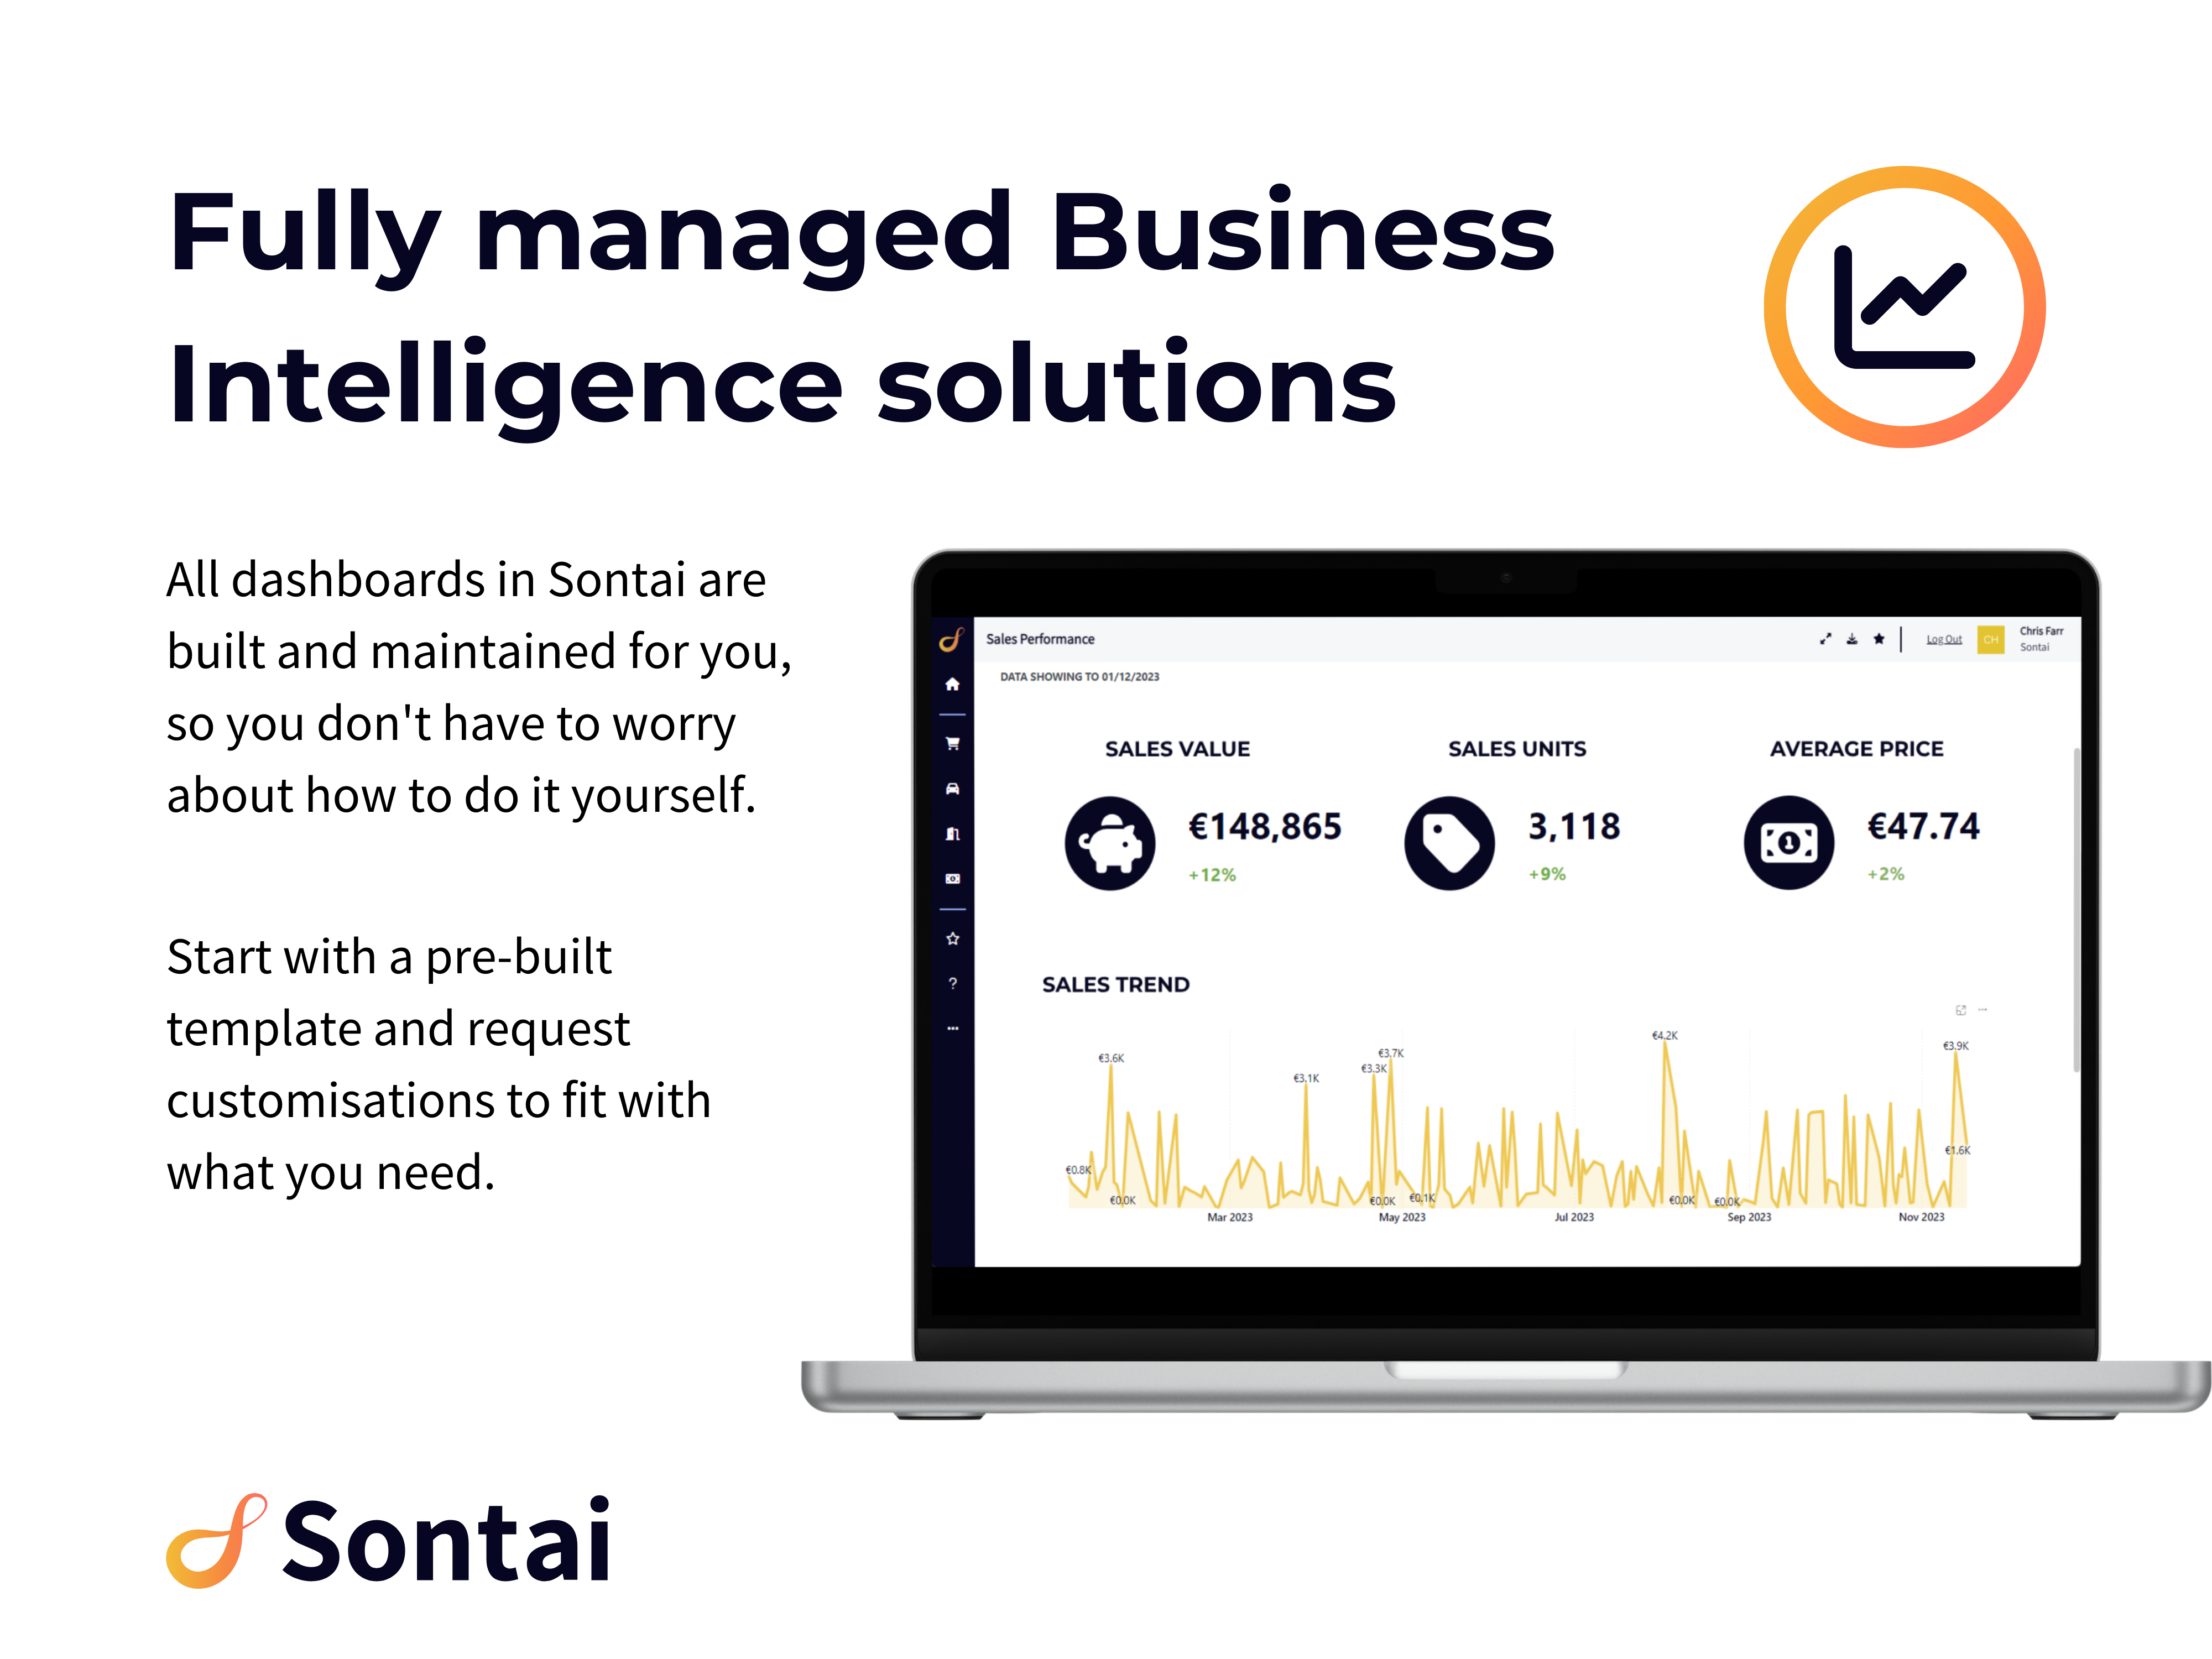 Fully managed Business Intelligence solutions from Sontai